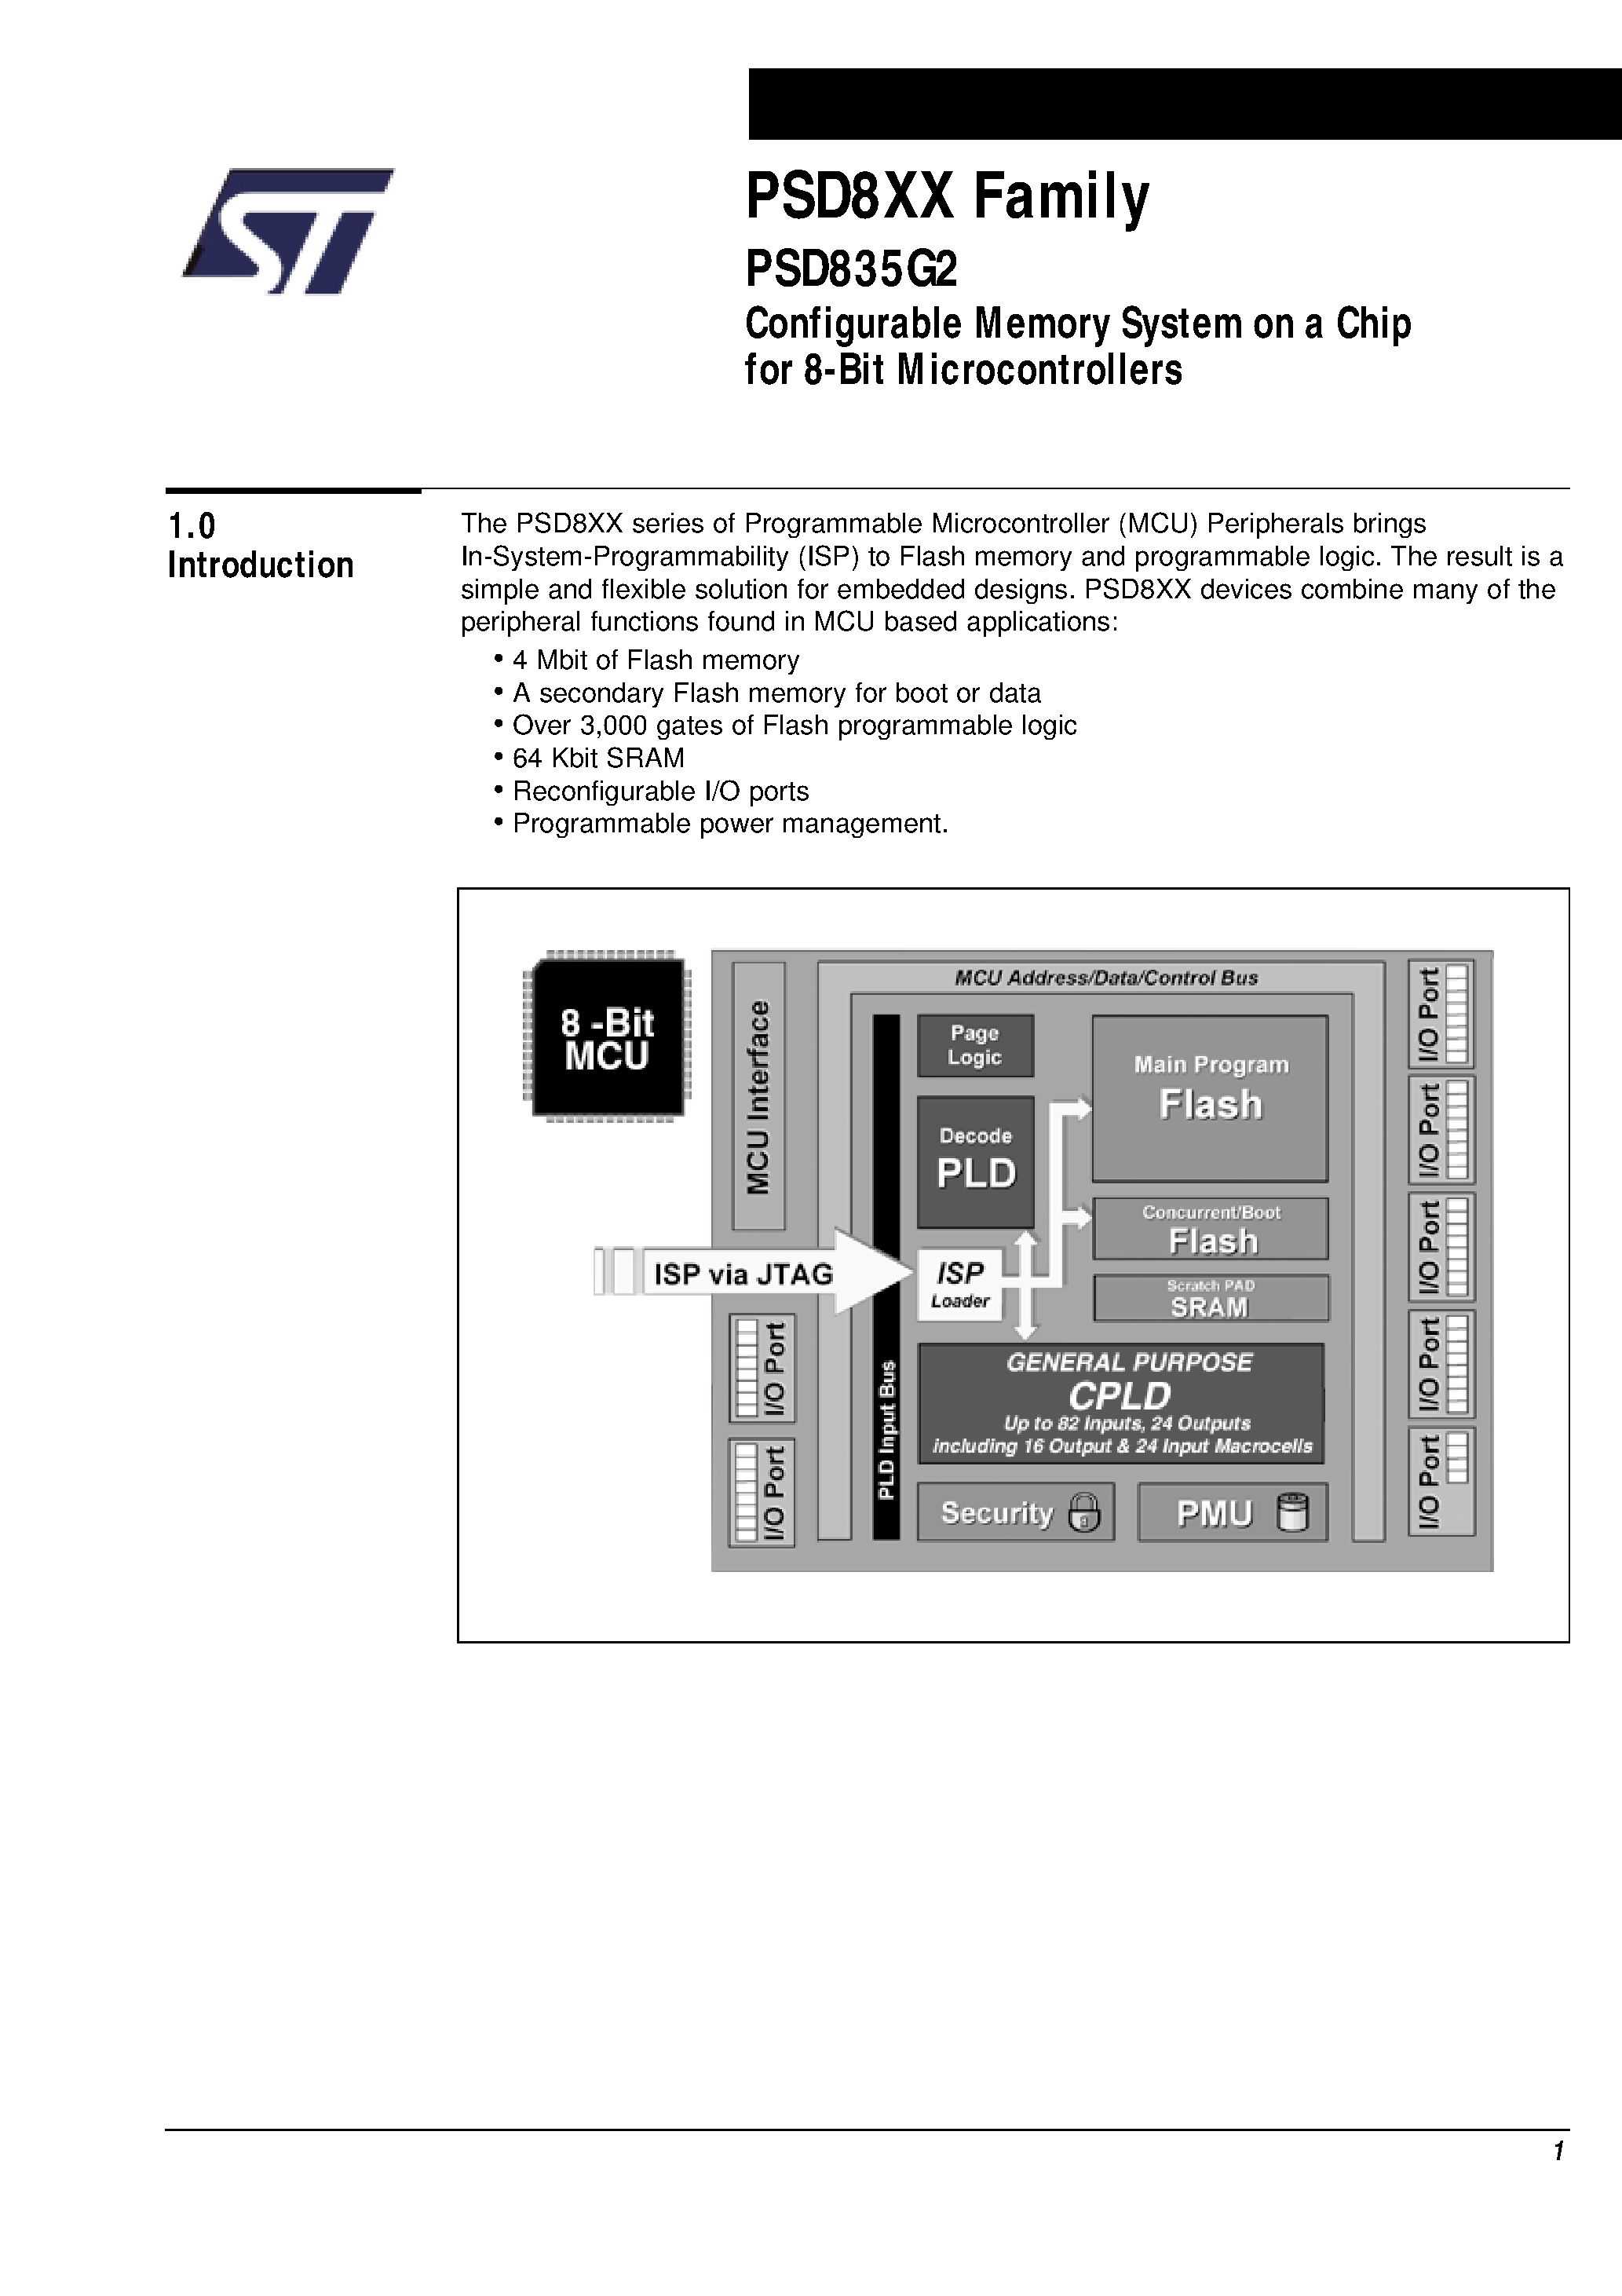 Datasheet PSD835F3-A-12B81 - Configurable Memory System on a Chip for 8-Bit Microcontrollers page 2